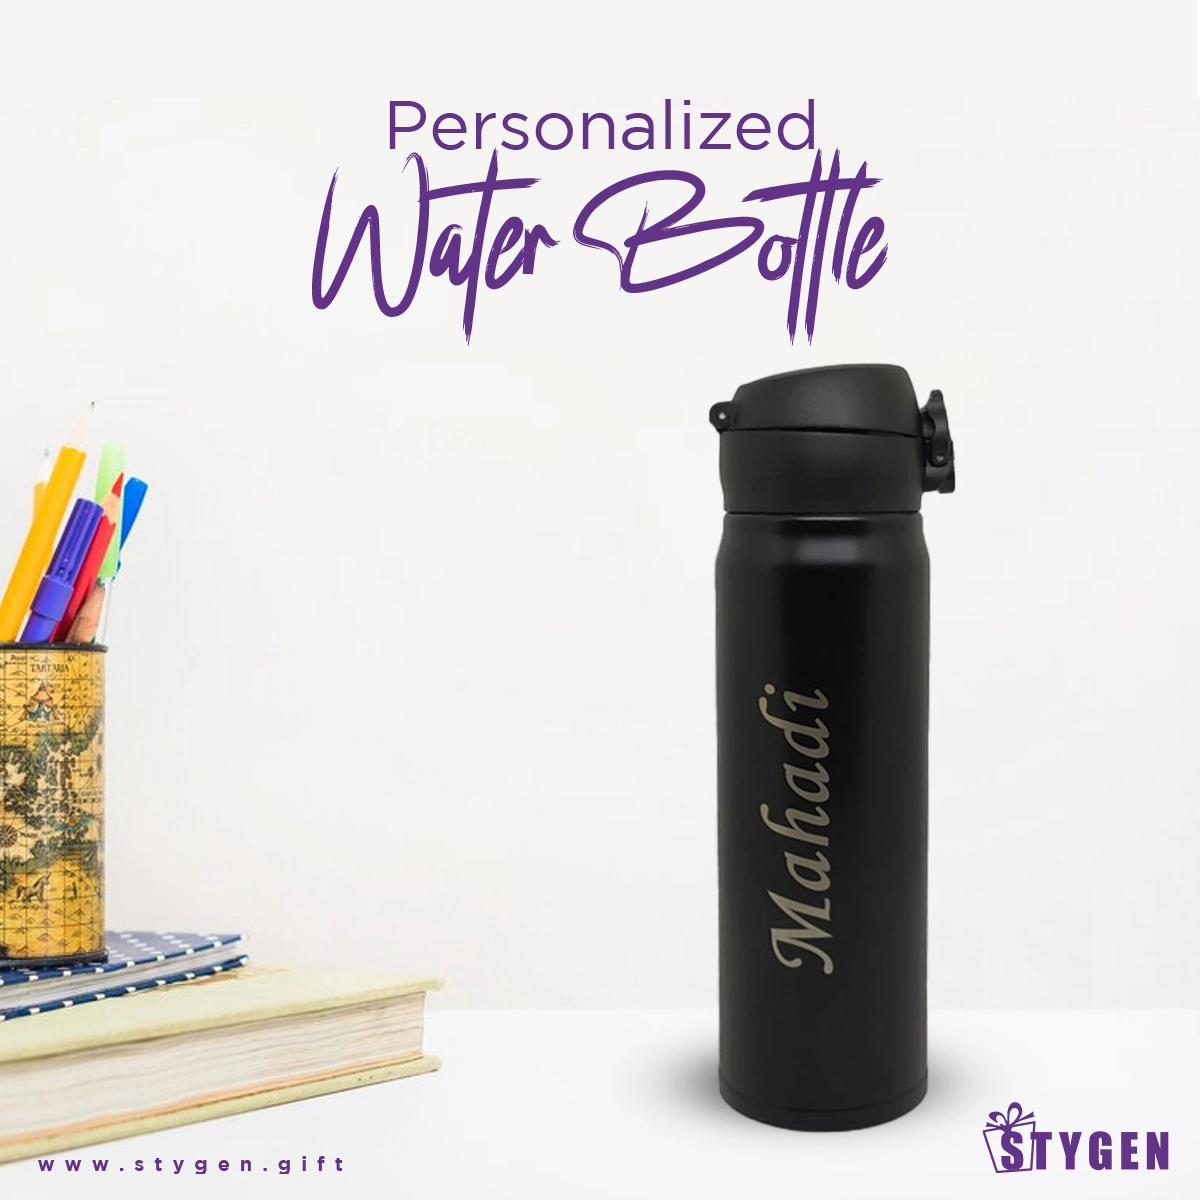 Personalized Thermos Water Bottle for your loved one (01)